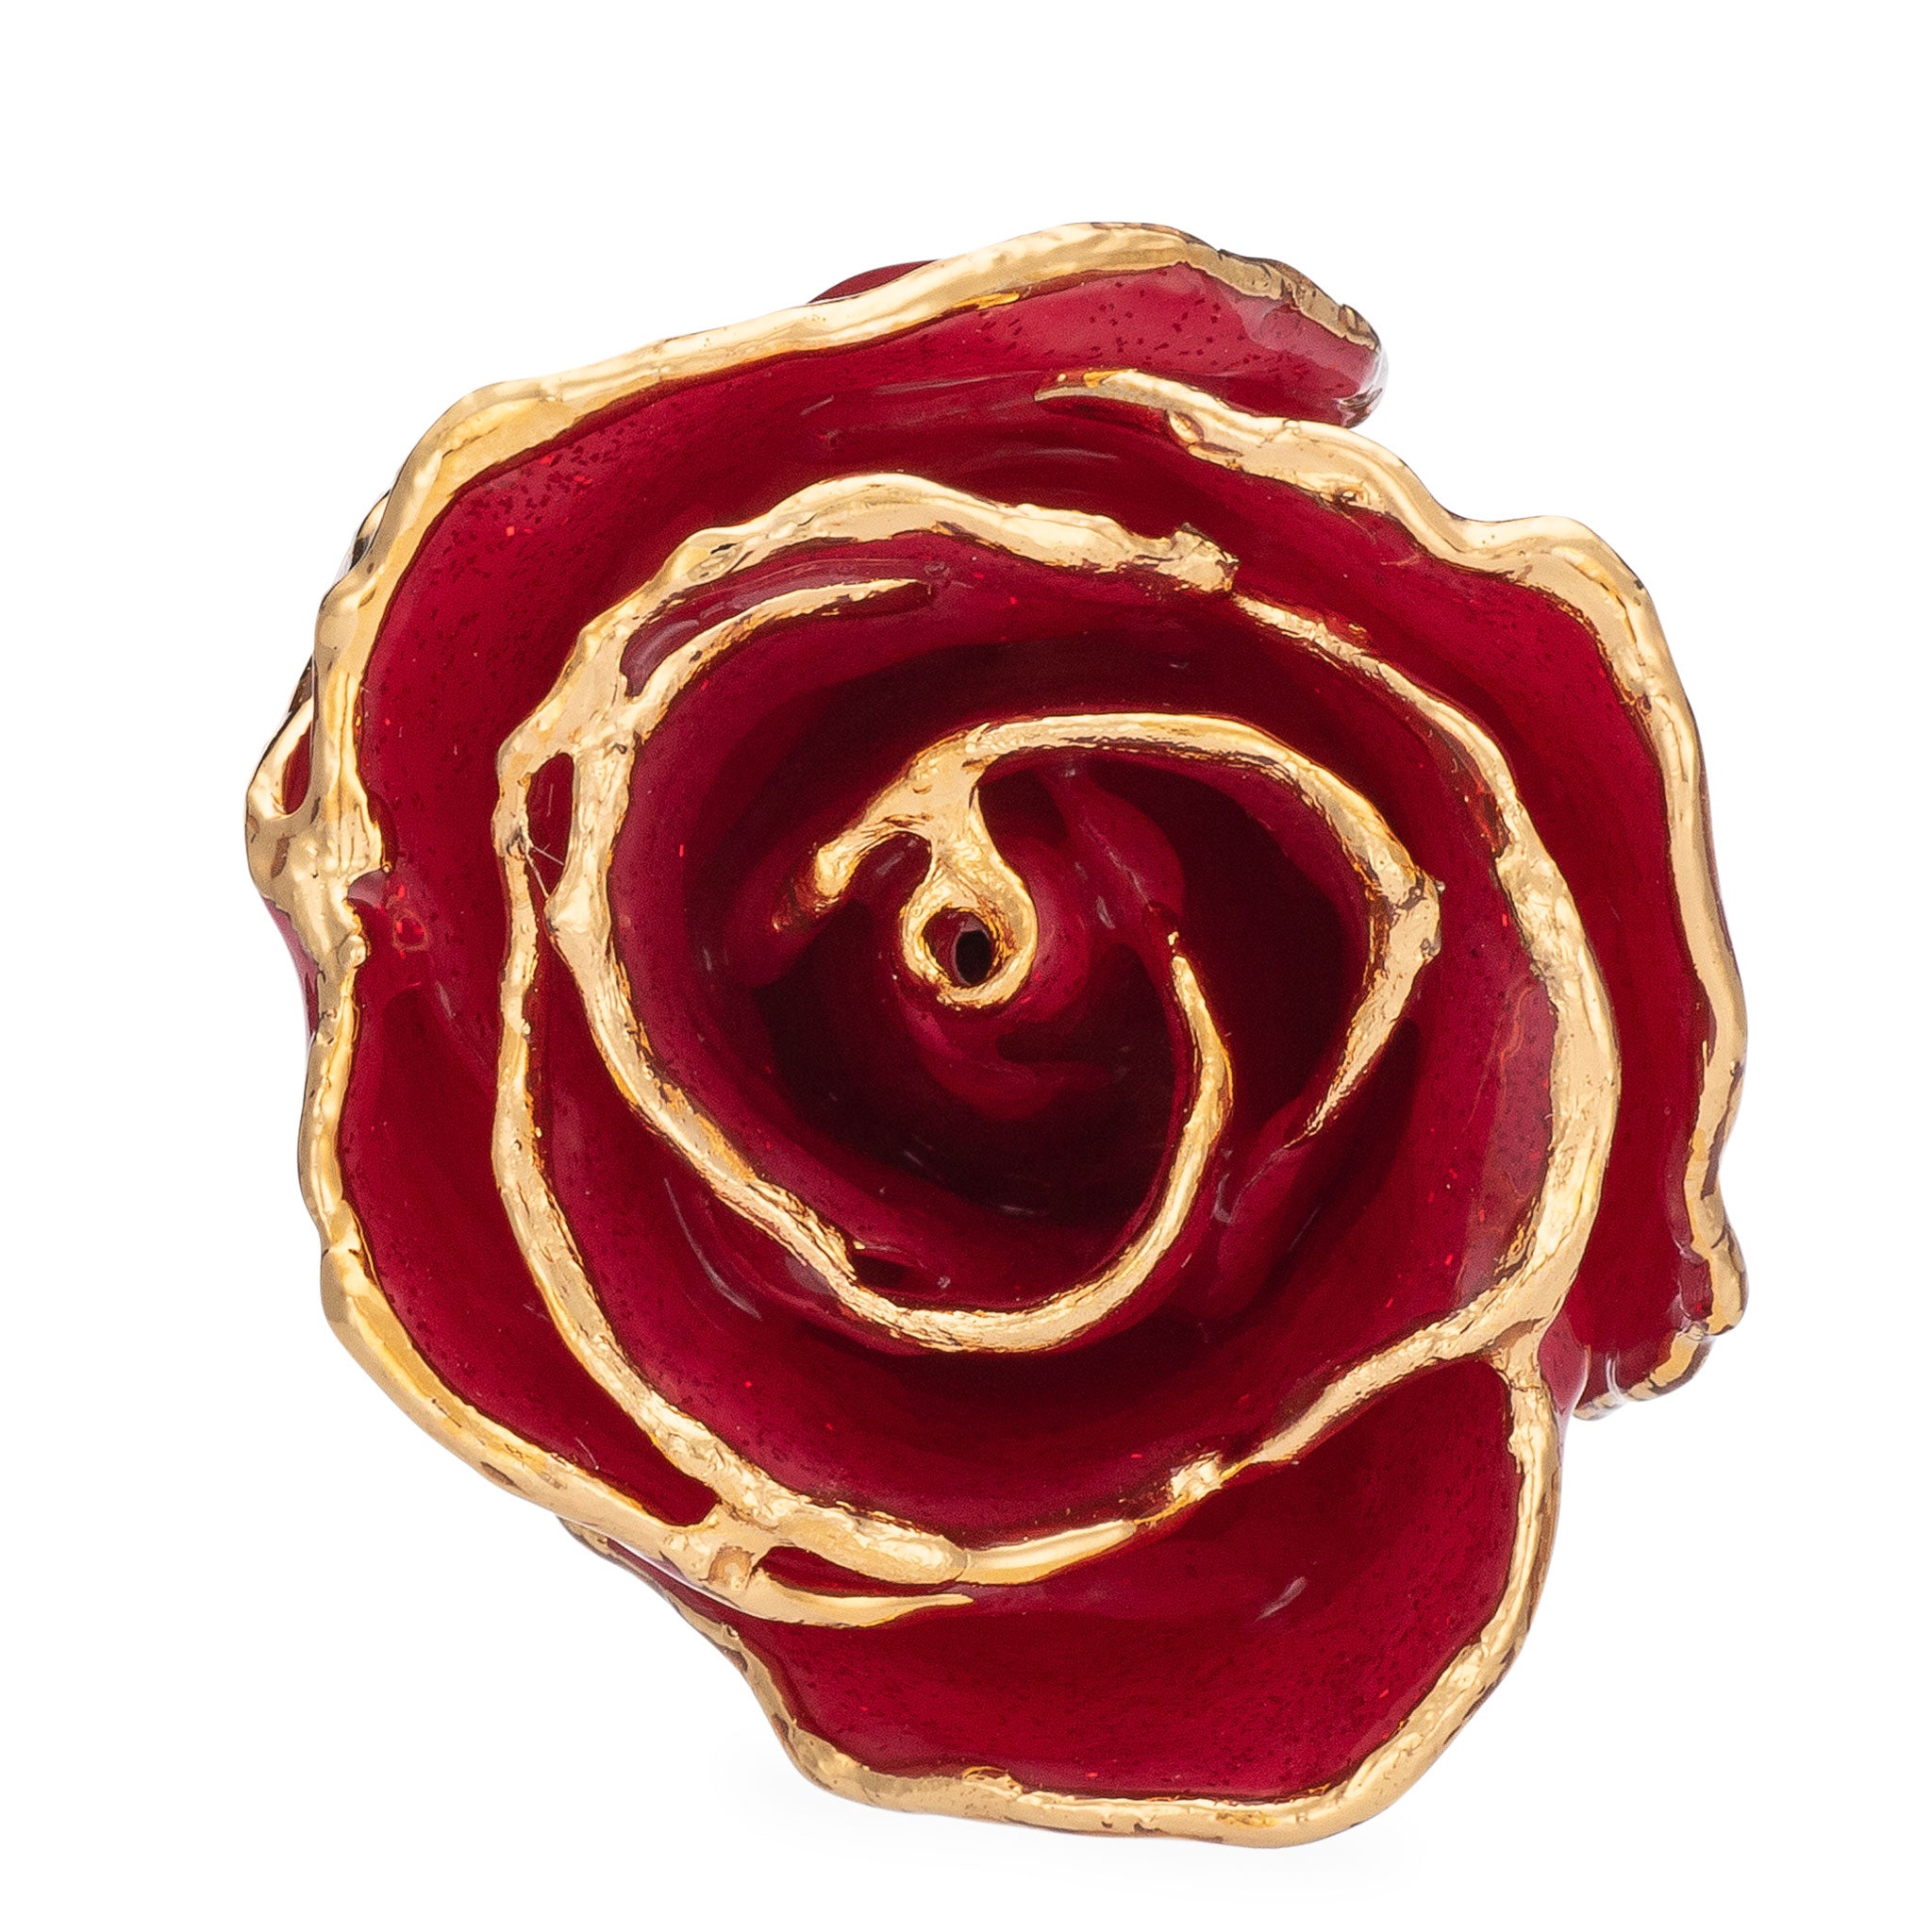 24K Gold Trimmed Forever Rose with Red Petals with Suspended Sparkles. View of Stem, Leaves, and Rose Petals and Showing Detail of Gold Trim view from top